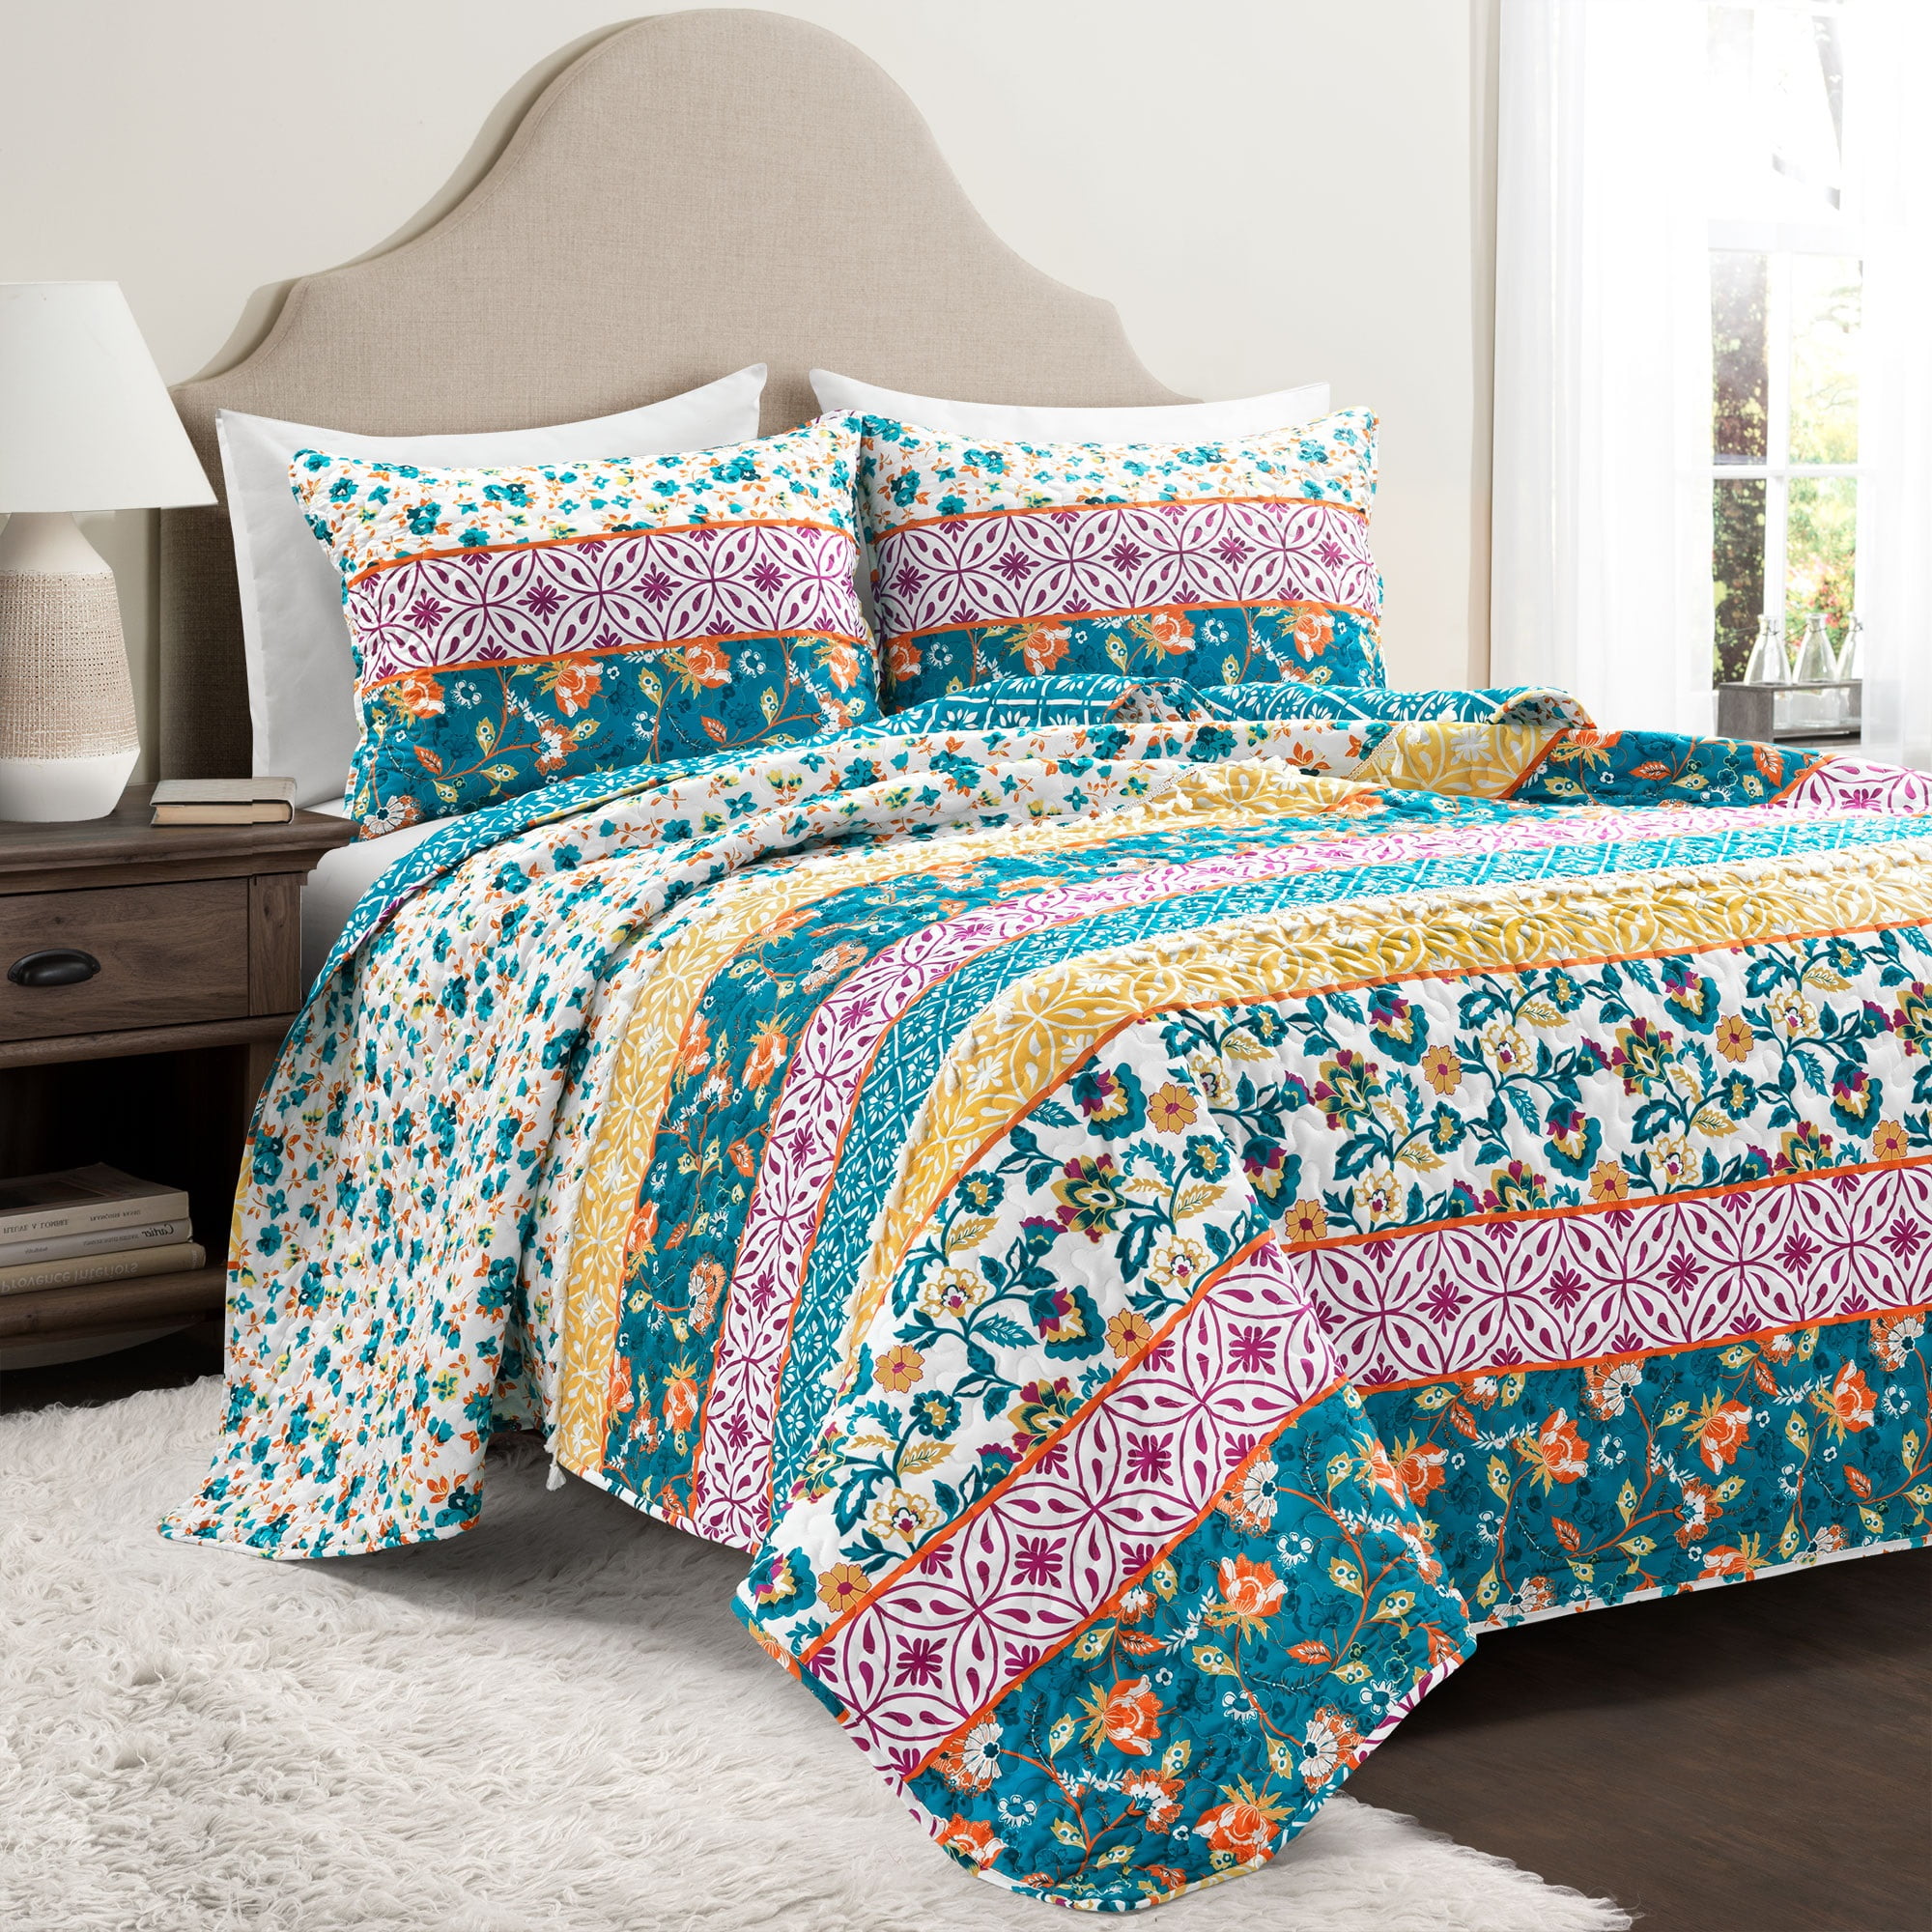 Details about   Floral Multi Print 100% Pure Cotton Fabric Bed Sheet With 2 Cushion Cover 